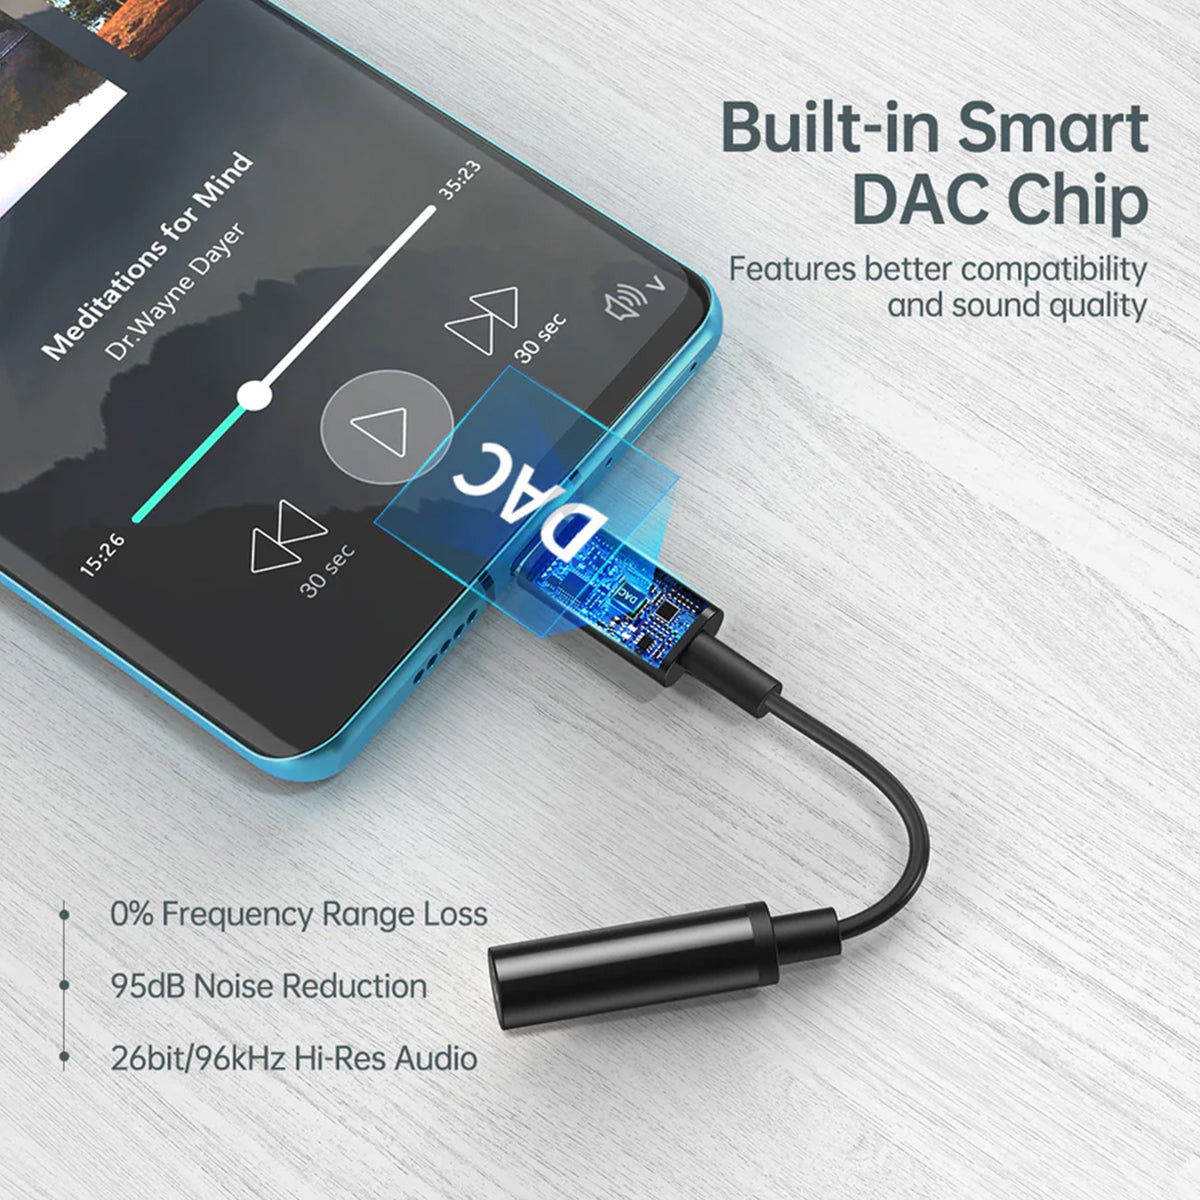 Choetech USB-C to 3.5mm Audio Jack Adapter (AUX003)